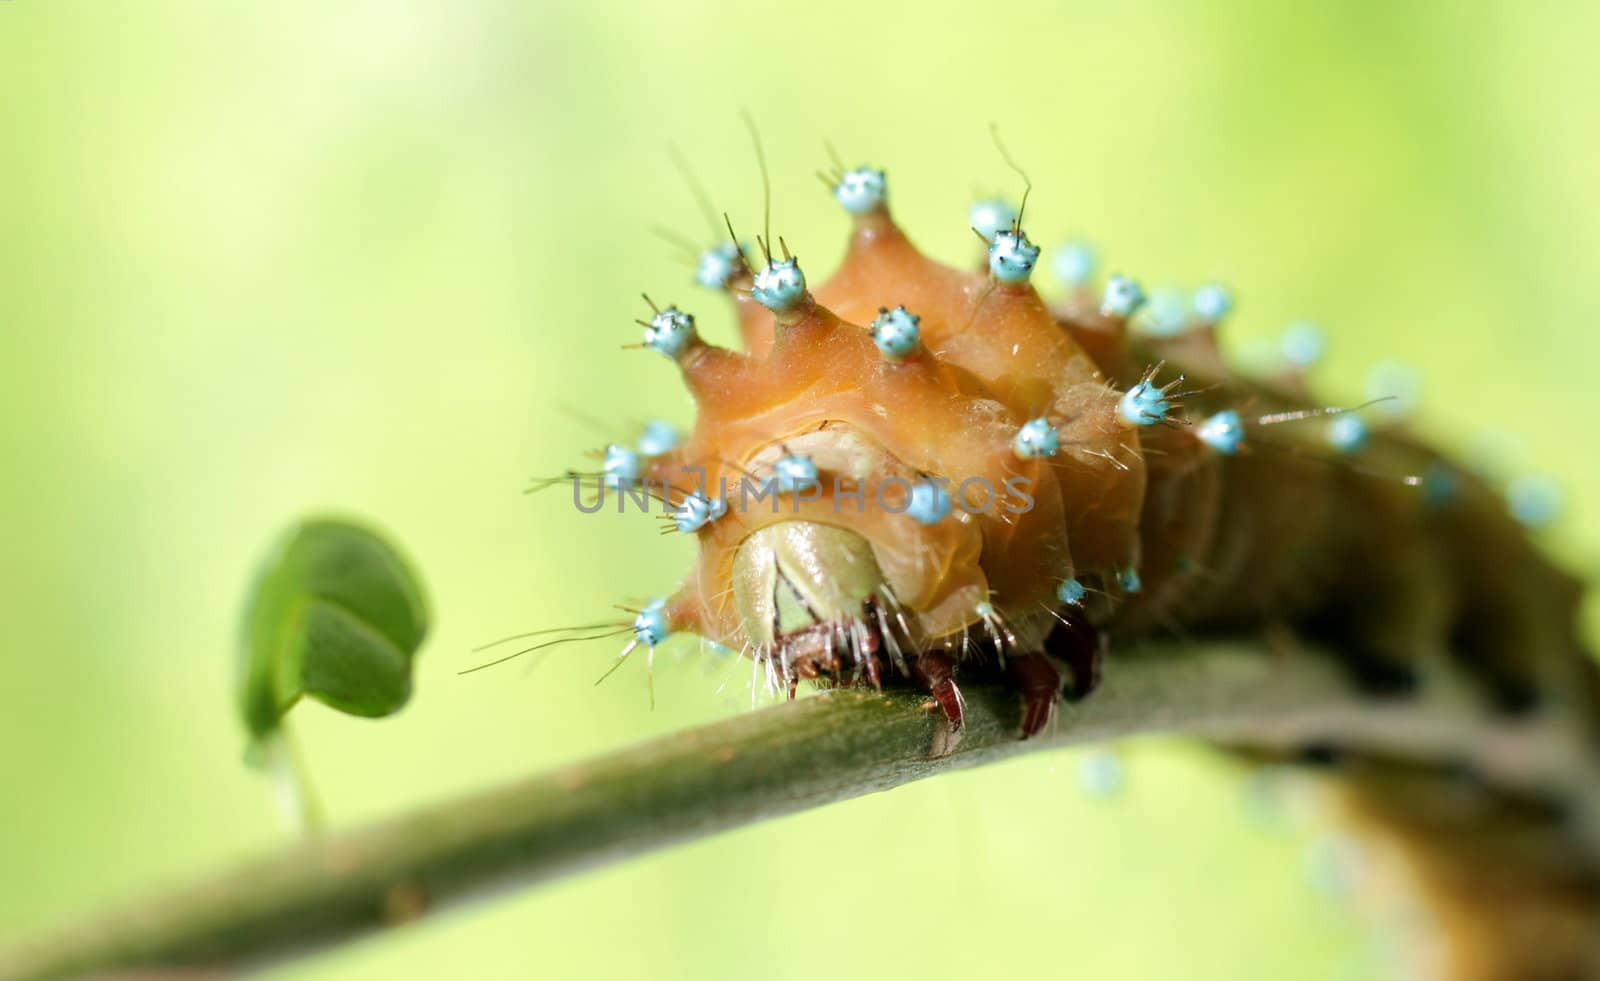 Caterpillar on branch of the tree with leaf